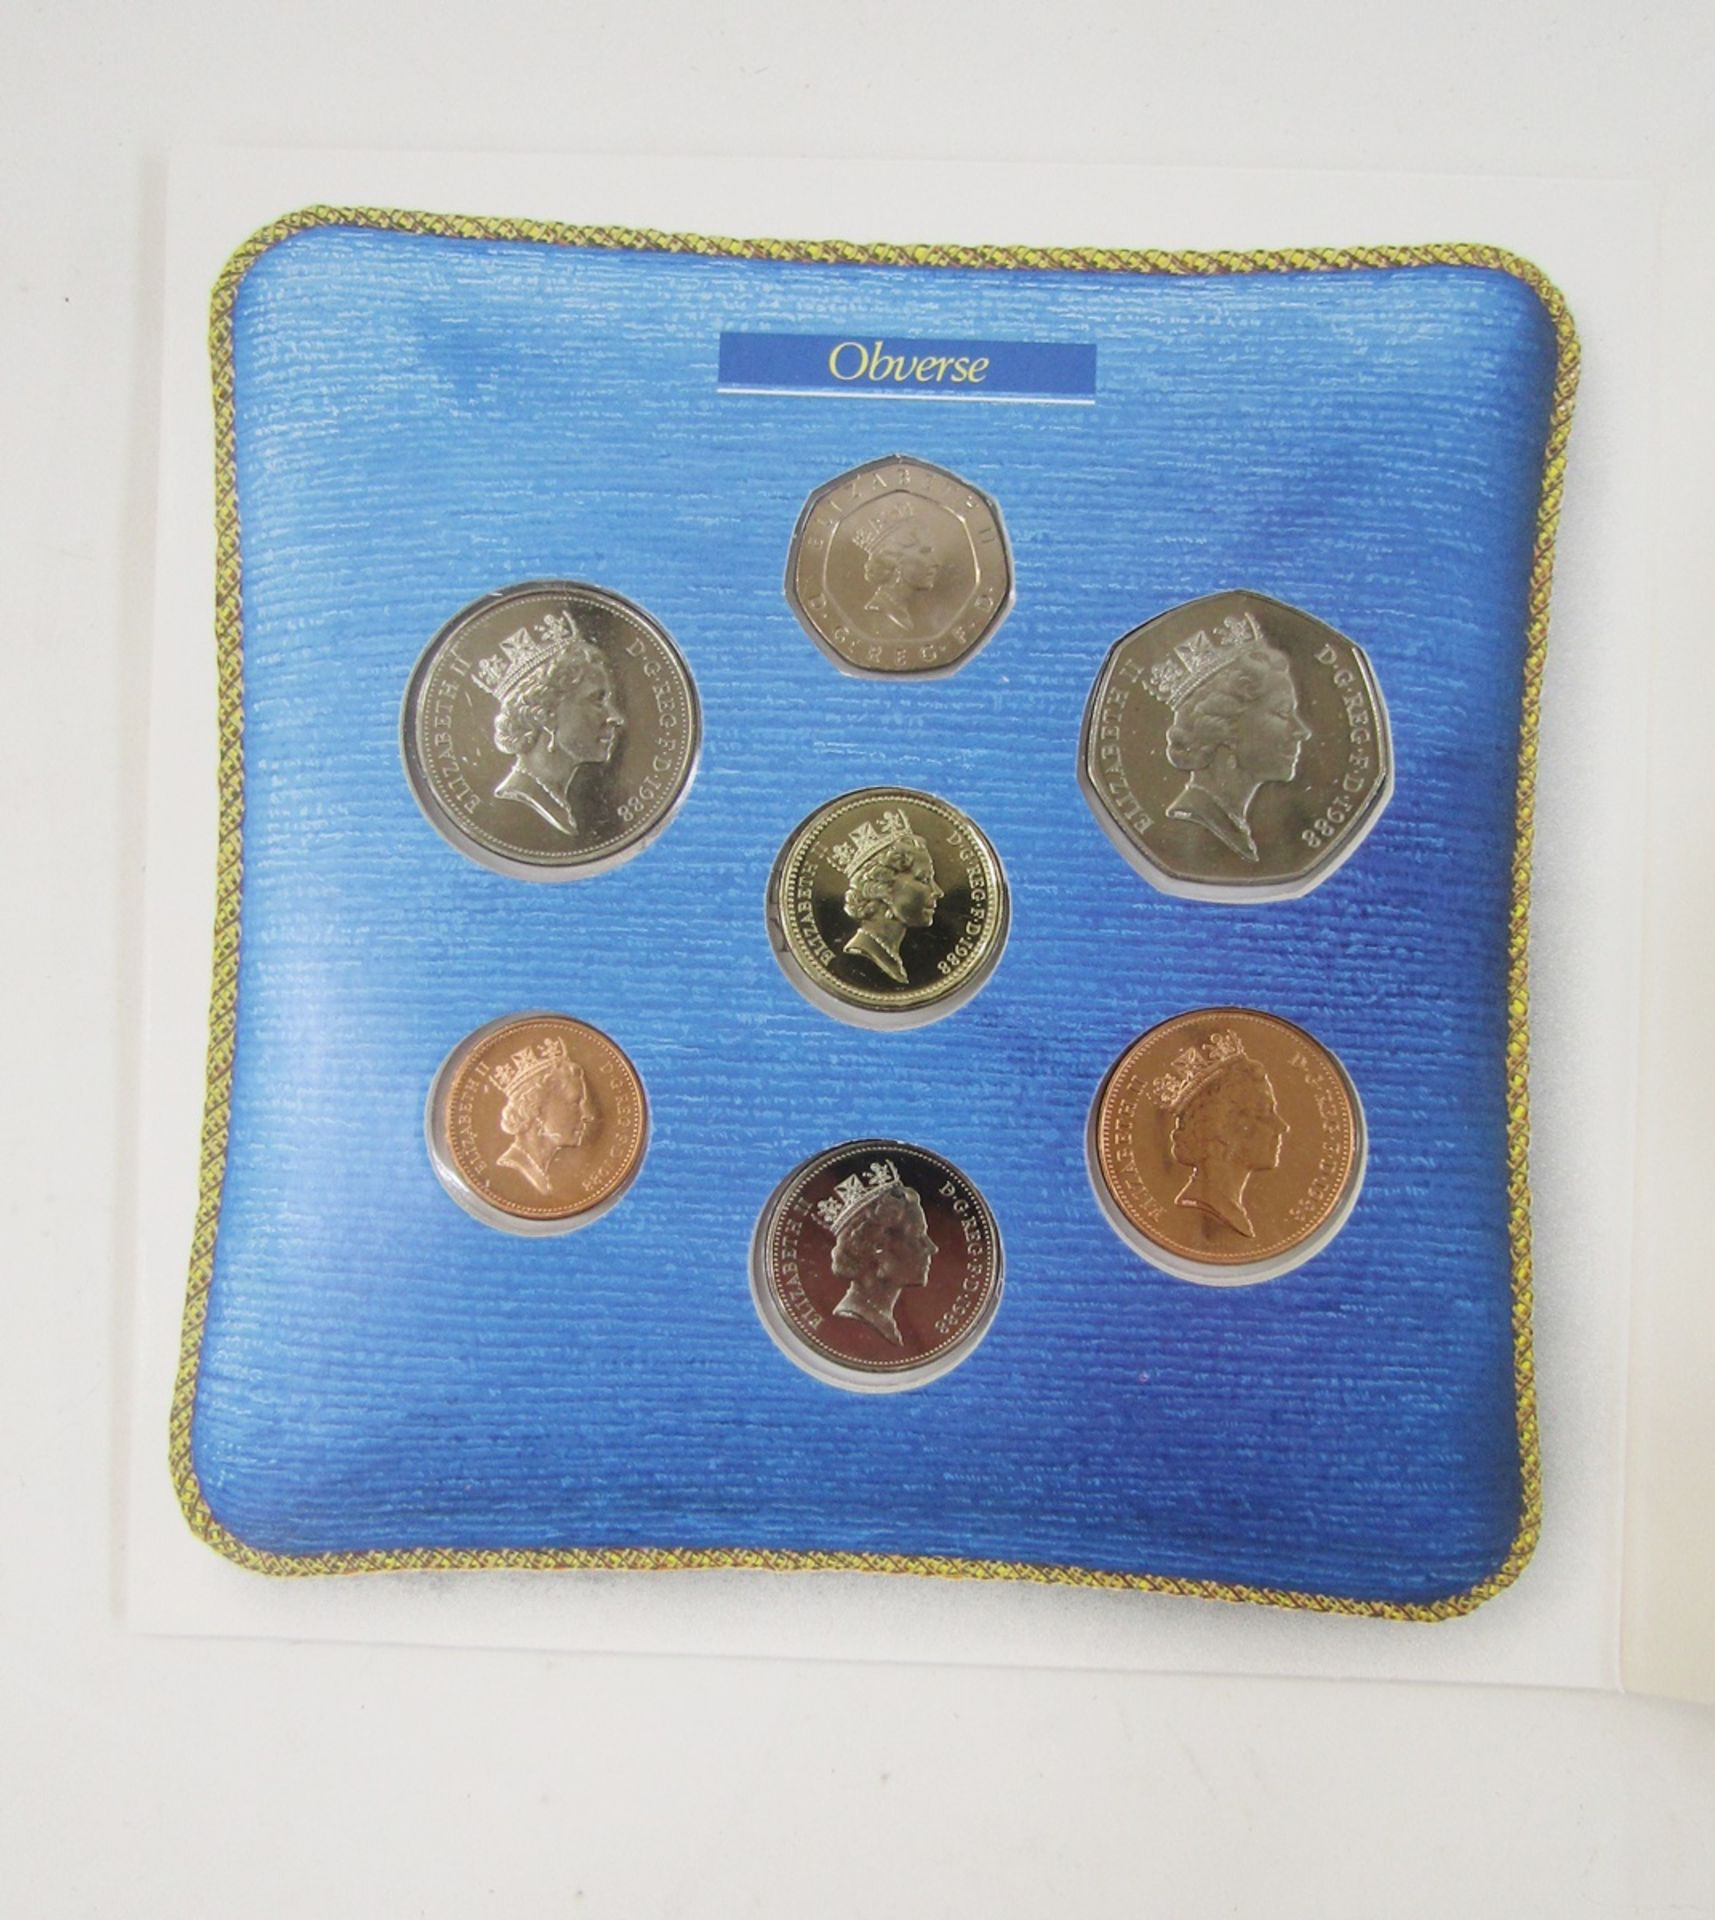 Collection of brilliant uncirculated coin sets (12), 1982 x 2, 1983 x 3, 1984 x 3, 1985, 1988, 1989, - Image 10 of 14